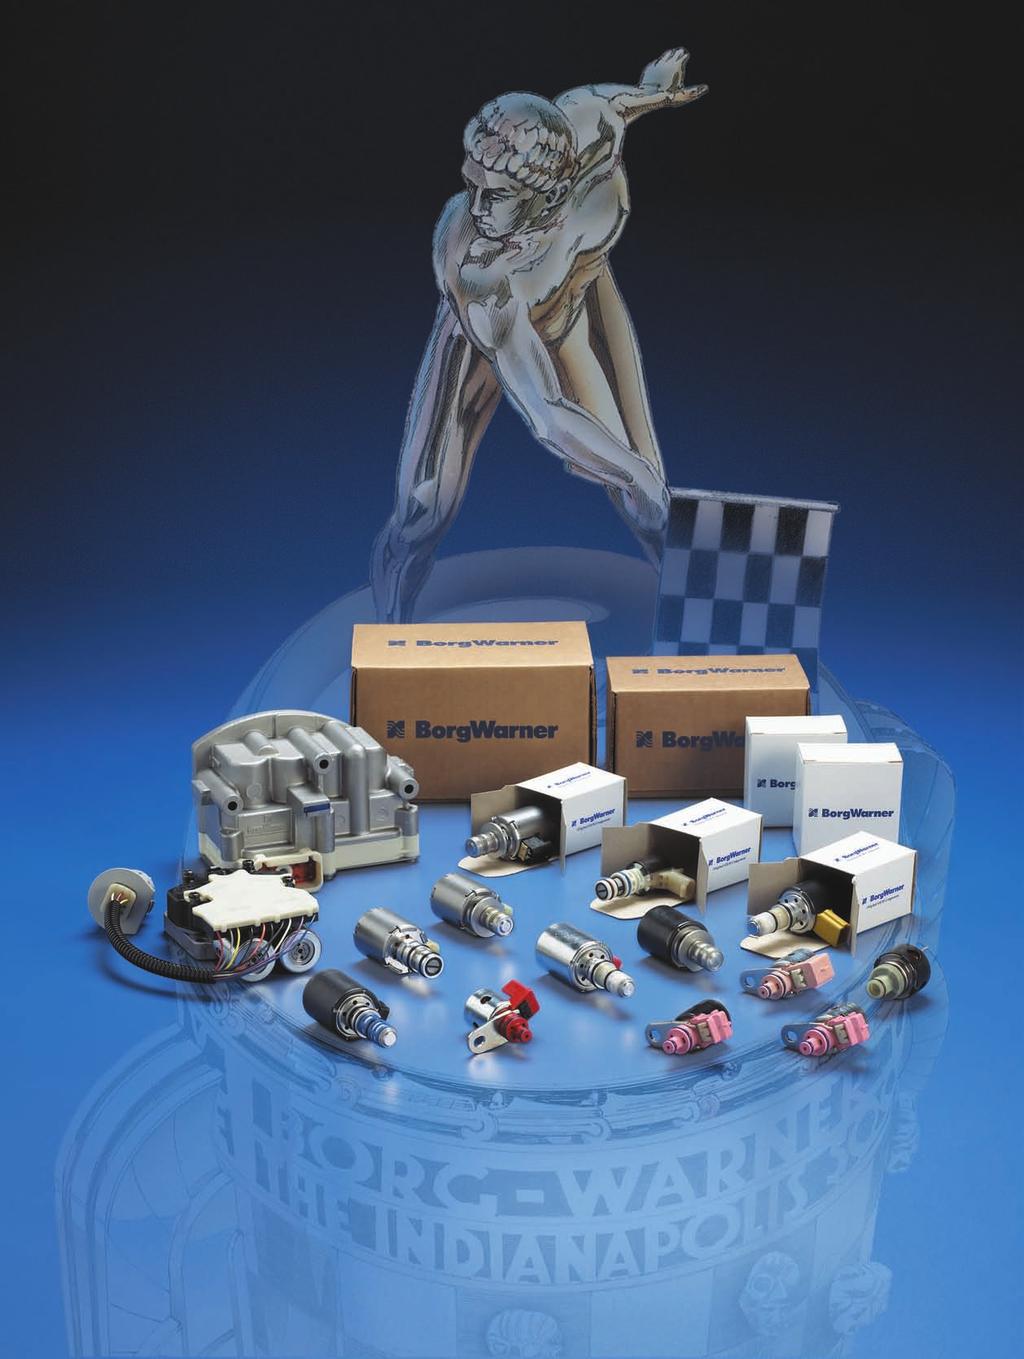 Precision matters. QUALITY TRANSMISSION SOLENOIDS FROM THE GLOBAL LEADER IN AUTOMATIC TRANSMISSION SYSTEMS TECHNOLOGY. TM BorgWarner Inc.